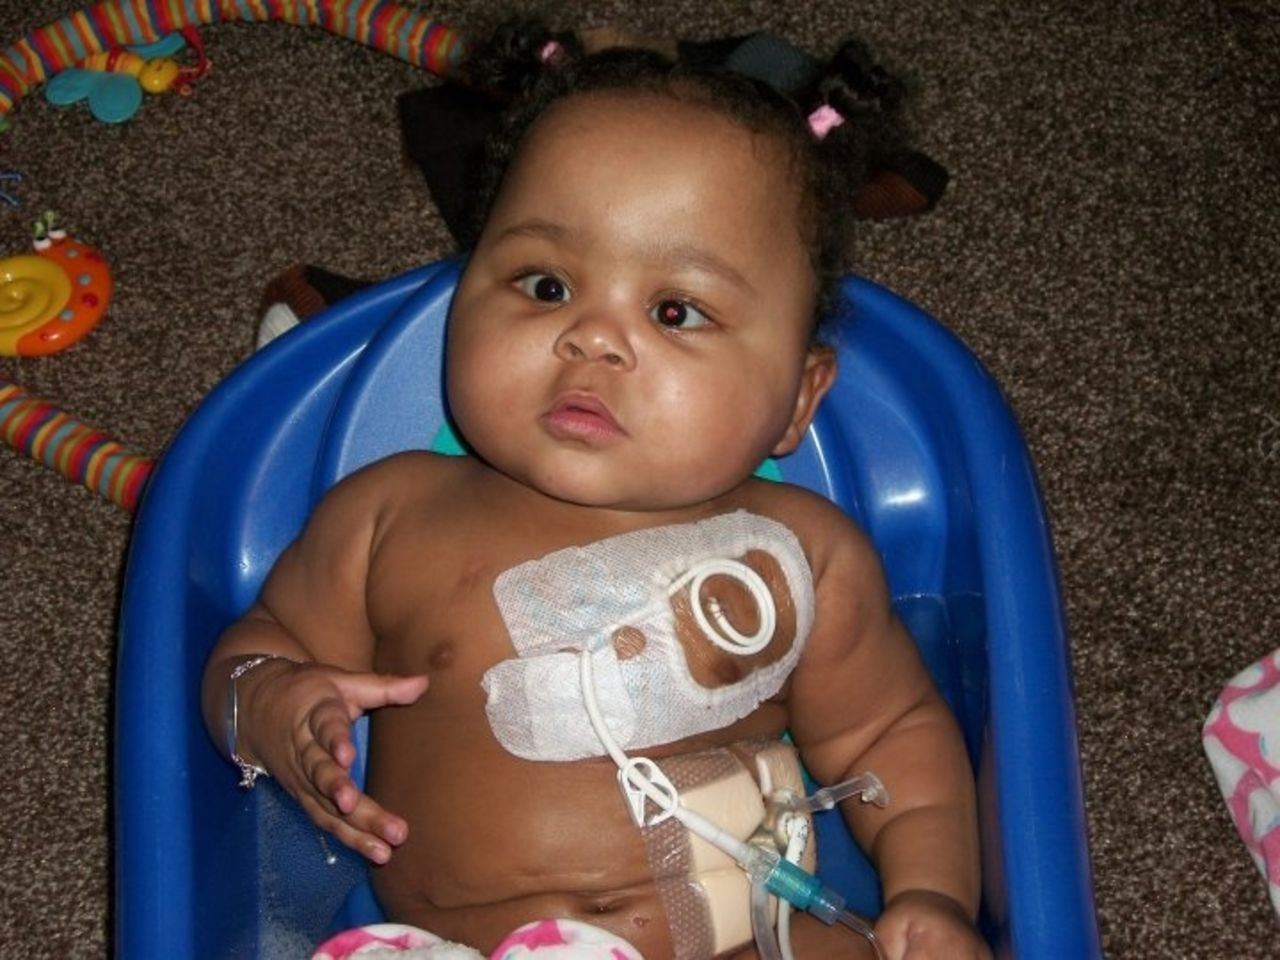 Alicia Coleman had a feeding tube in her stomach and a chest tube in her vein. A caregiver at a medical daycare mistakenly used the wrong tube and pumped medicine into Coleman's chest instead of her stomach. Coleman died when the medicine stopped her tiny heart.